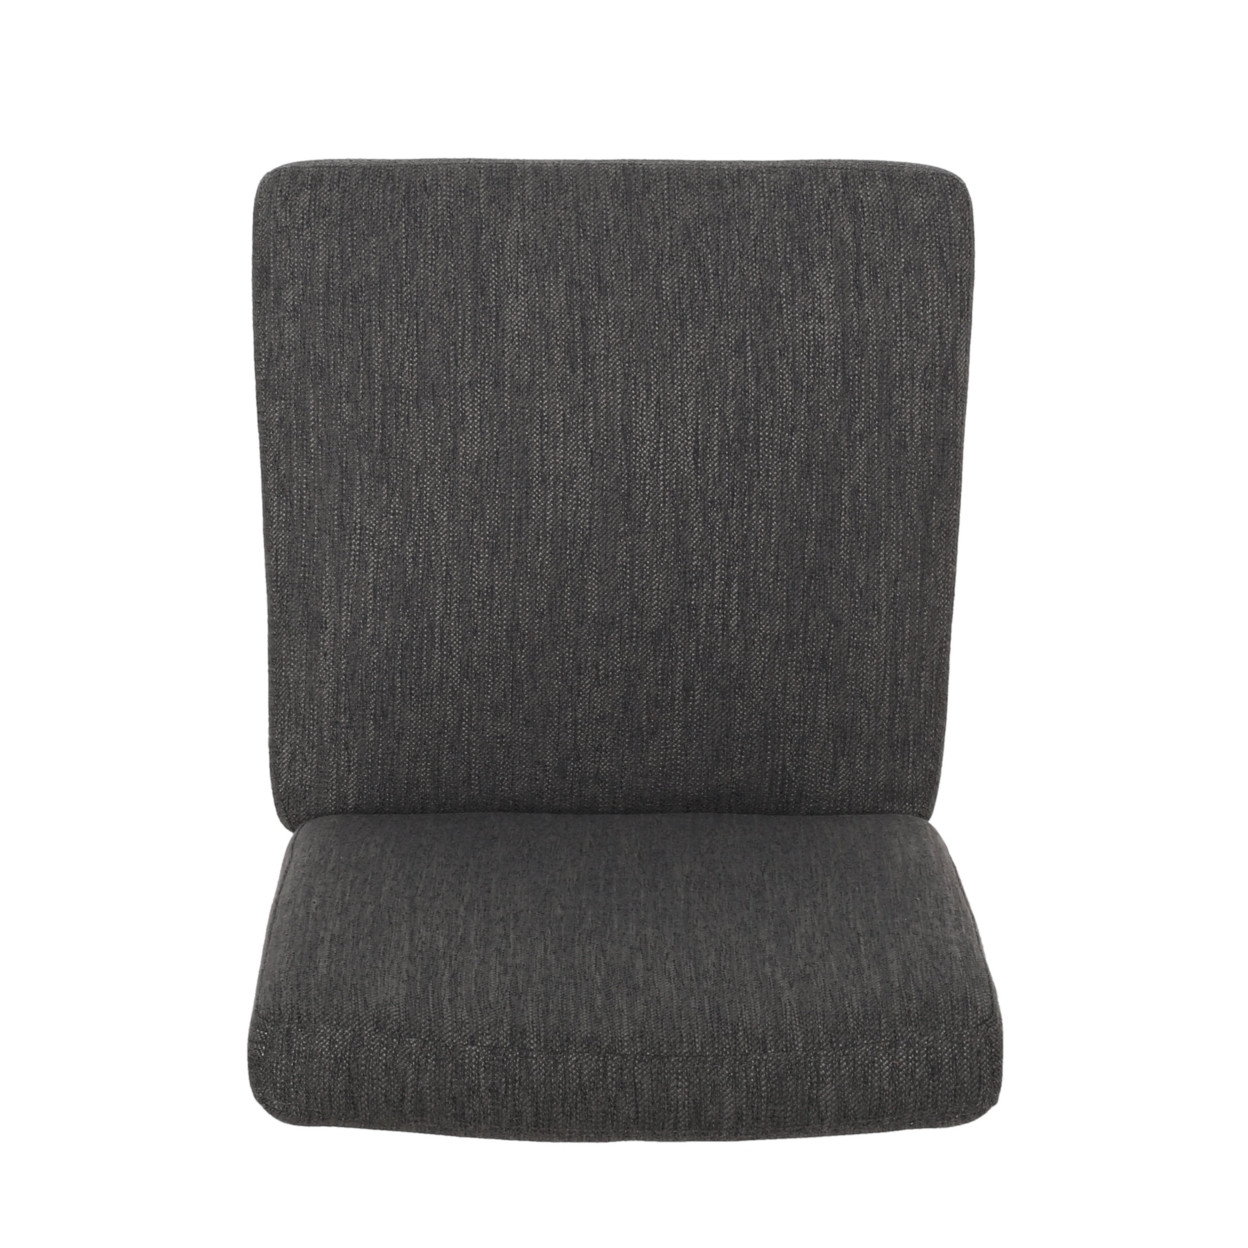 Pocatello Contemporary Upholstered Dining Chair, Set Of 2 - Charcoal/Grey